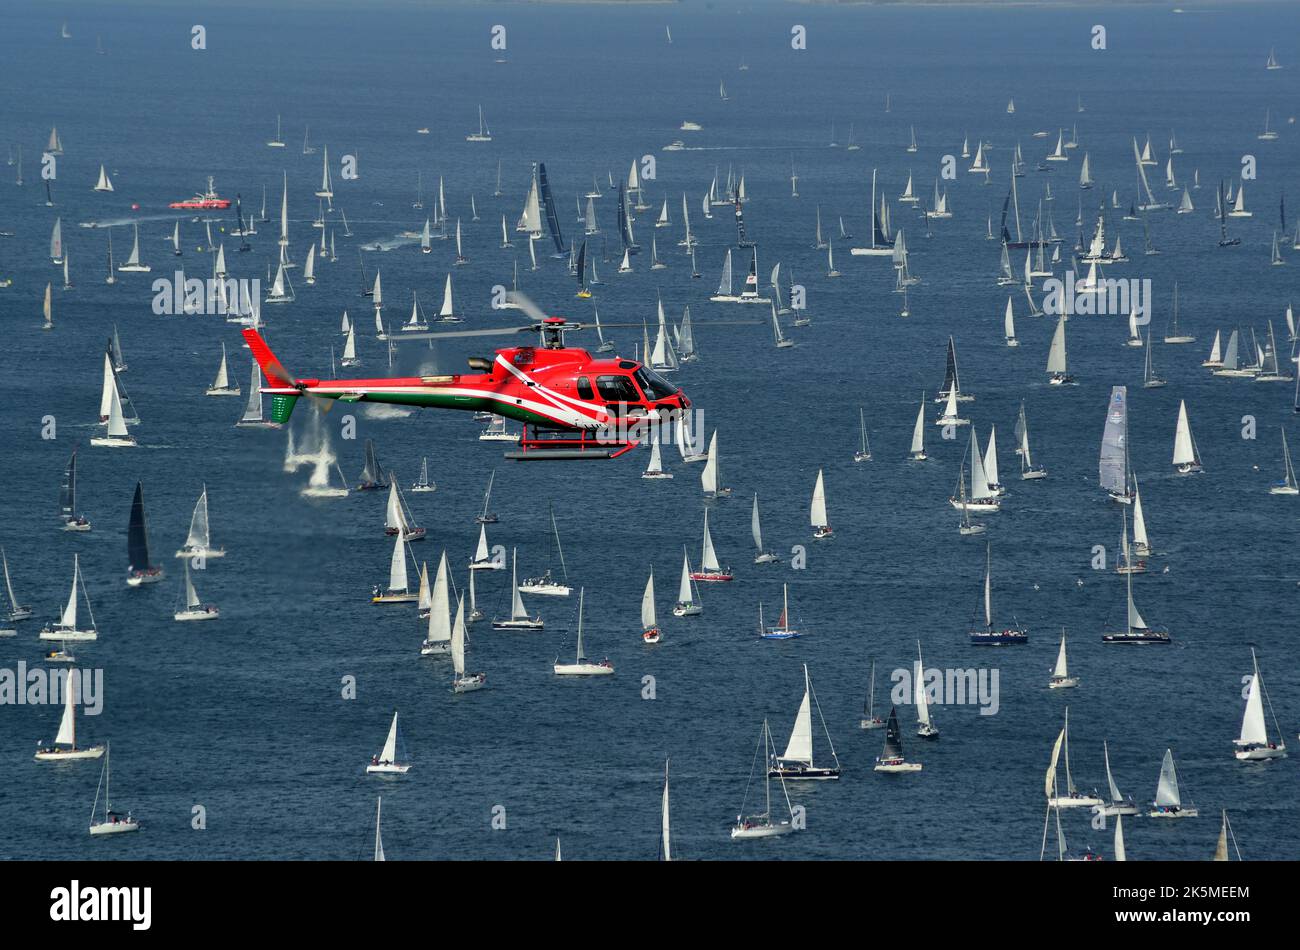 Trieste, Italy. October 9th, 2022. Barcolana number 54. 1614 sailboats at the start of the largest regatta in the world. The American Deep Blue, 26 meters and 25 tons,with Wendy Schmidt at the helm, triumphs. The first Barcolana won by a woman. Stock Photo